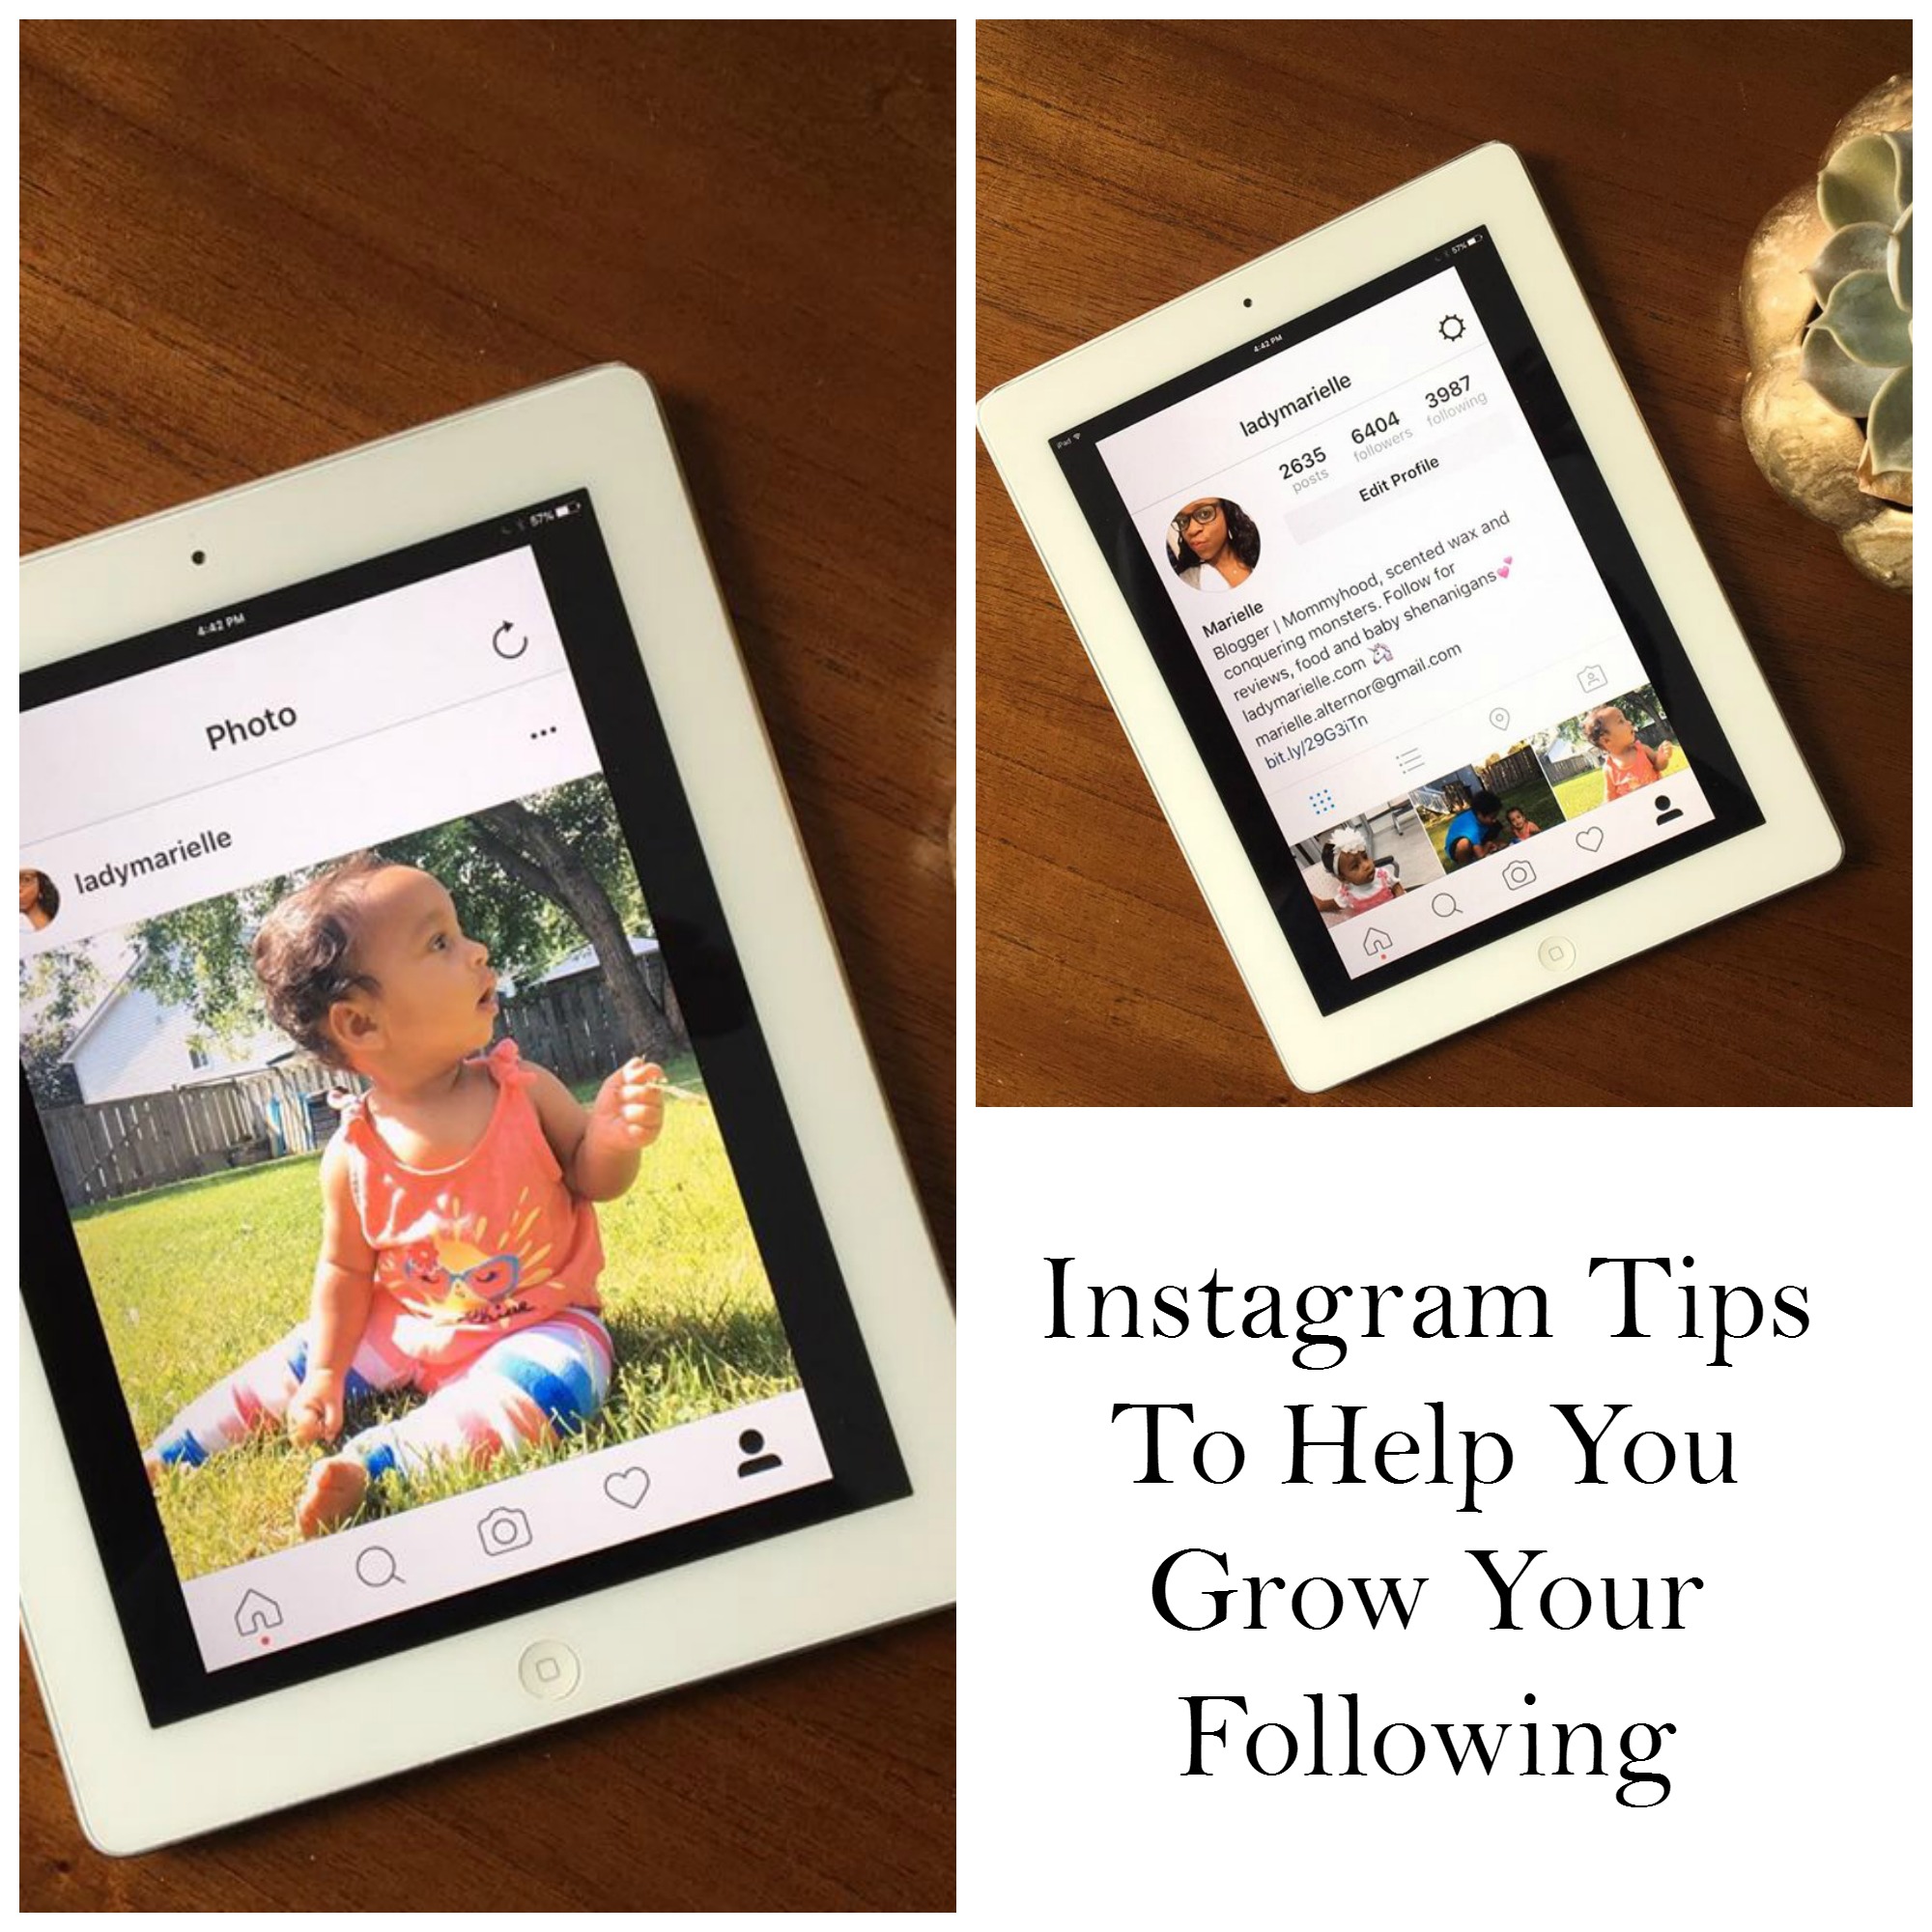 Instagram Tips To Help You Grow Your Following